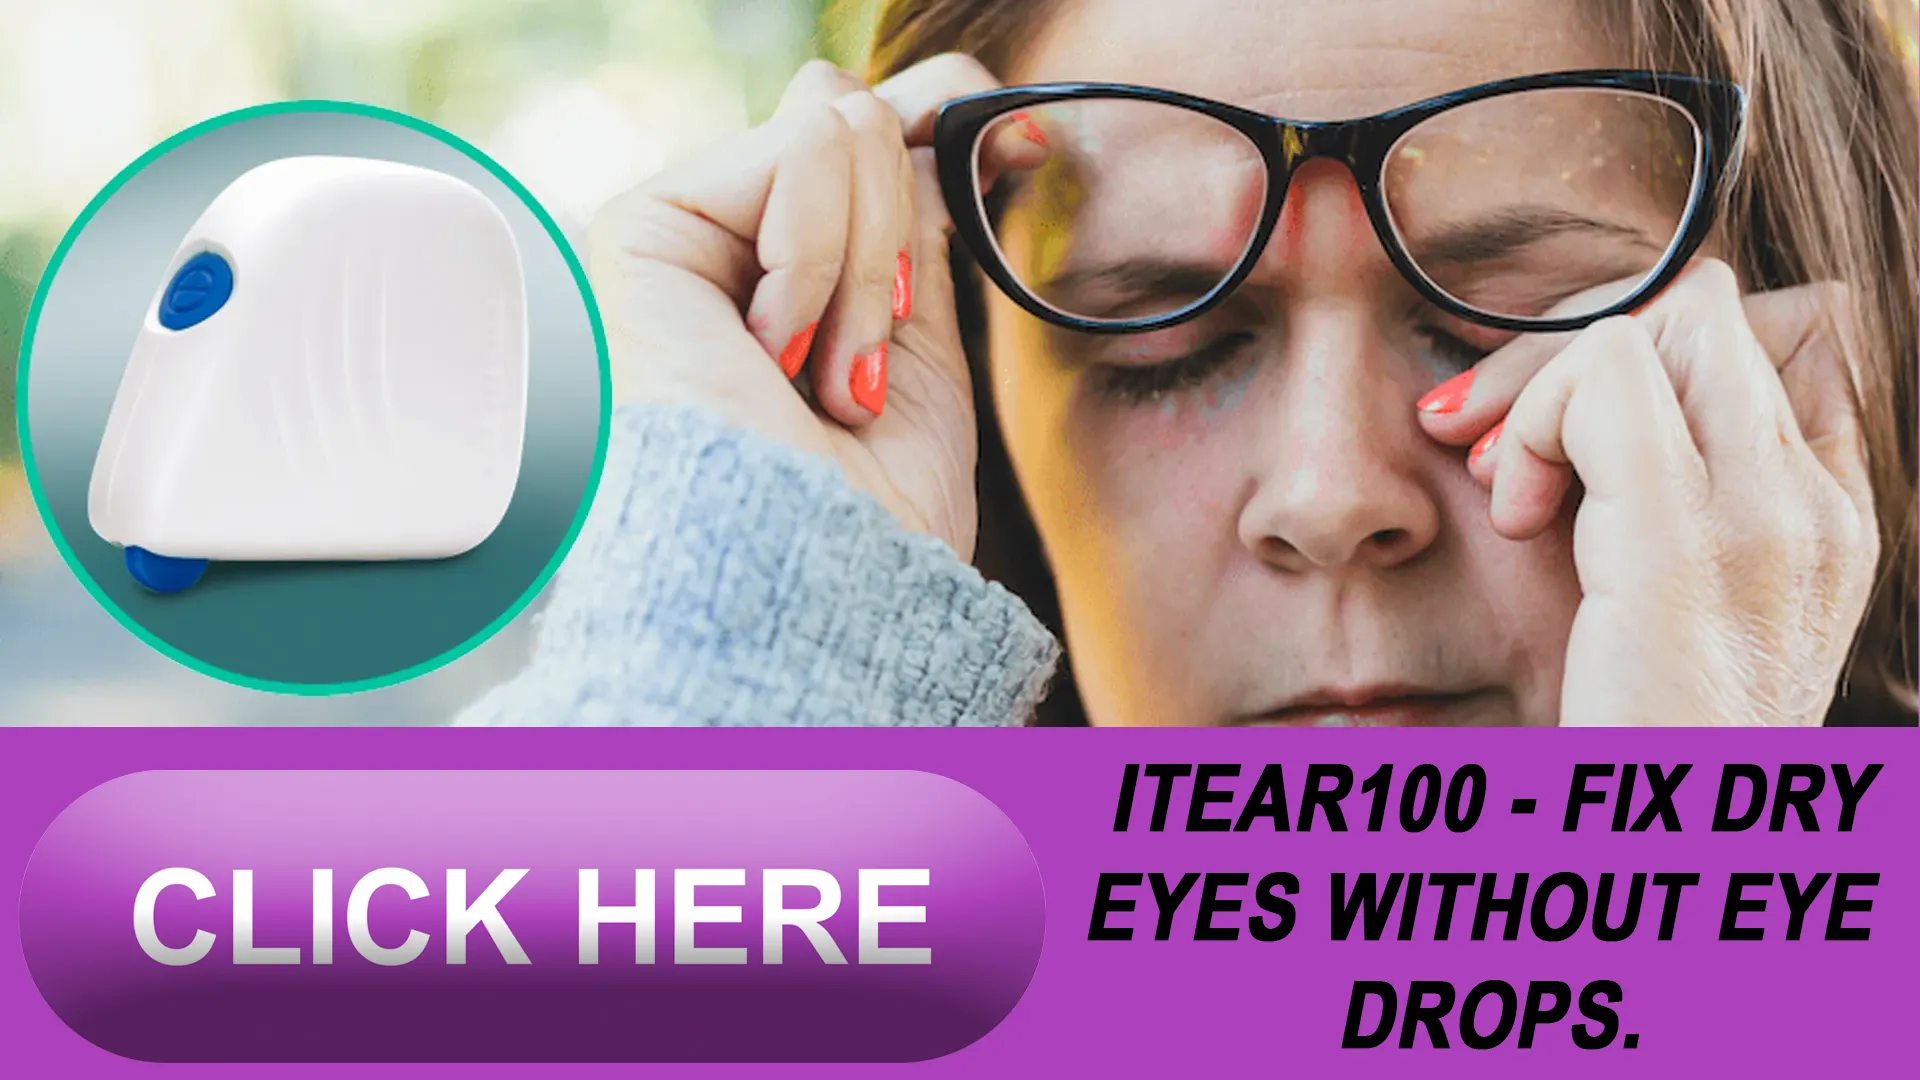 Comparing iTear100 to Common Eye Drop Brands